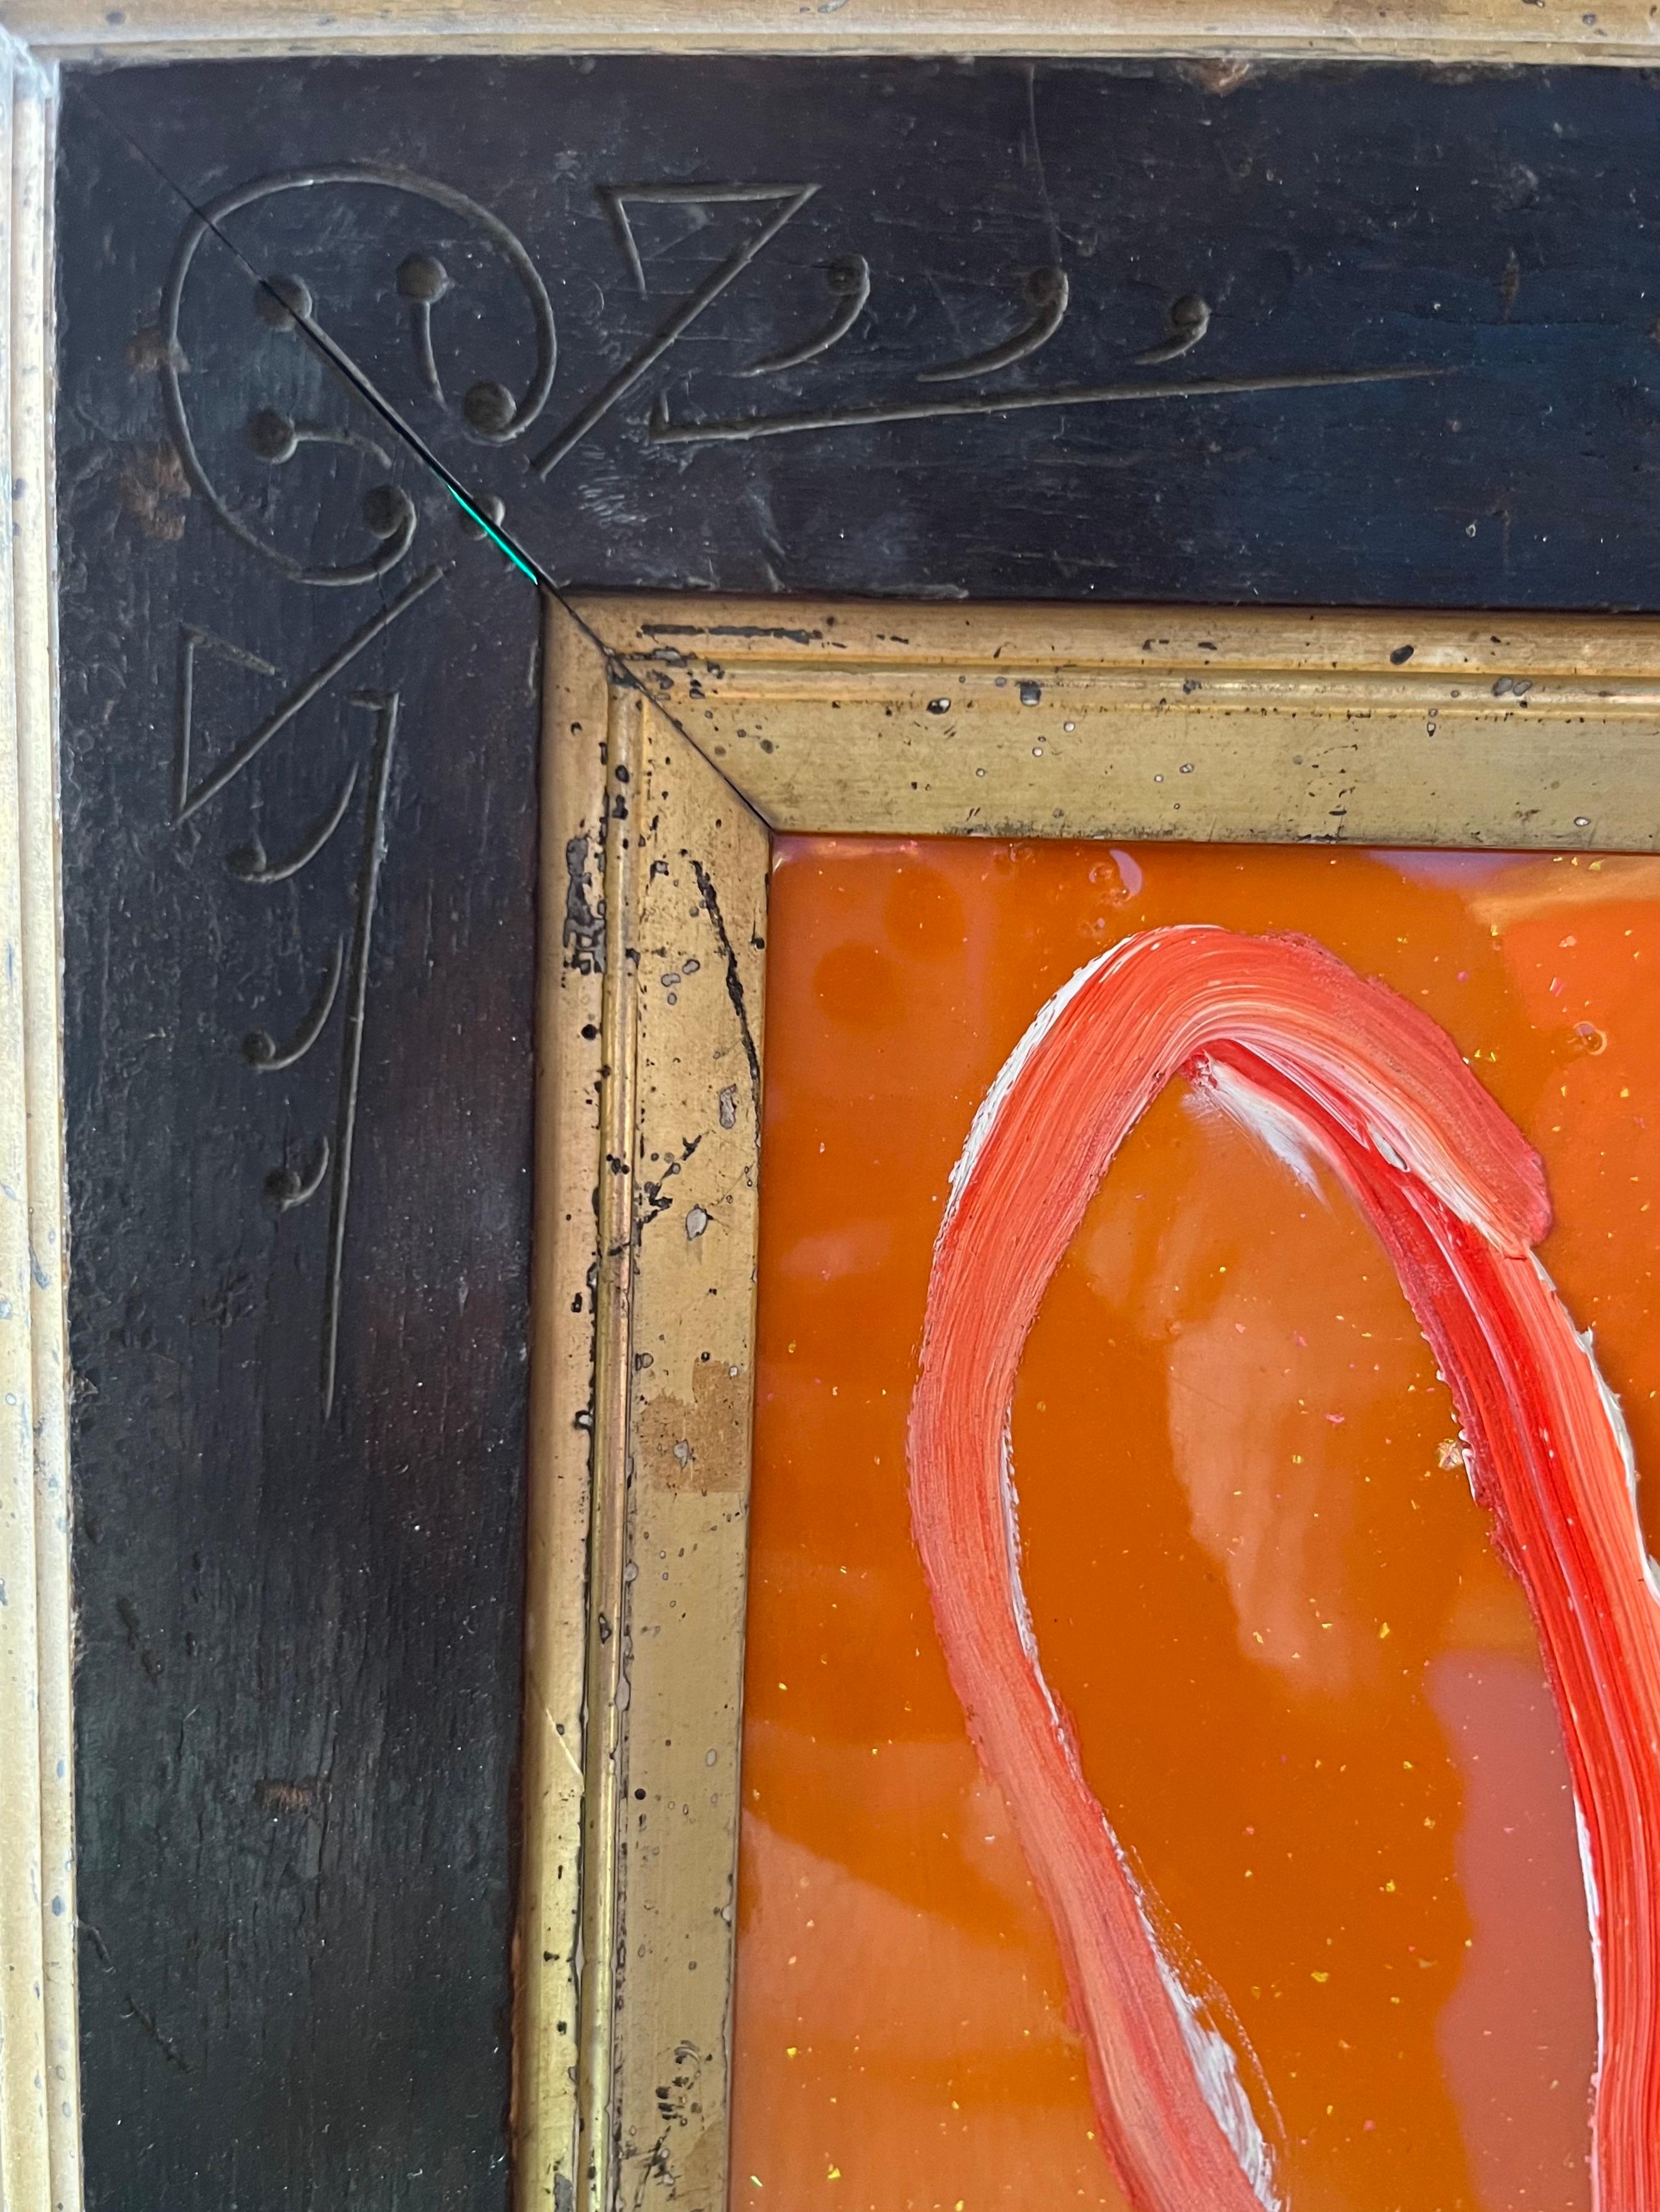 A lovely portrait by Hunt Slonem, featuring a bright orange linear depiction of a rabbit. This particular work is coated in resin epoxy, making the background lacquered and eye-catching. This work is finished with a vintage frame, with lovely